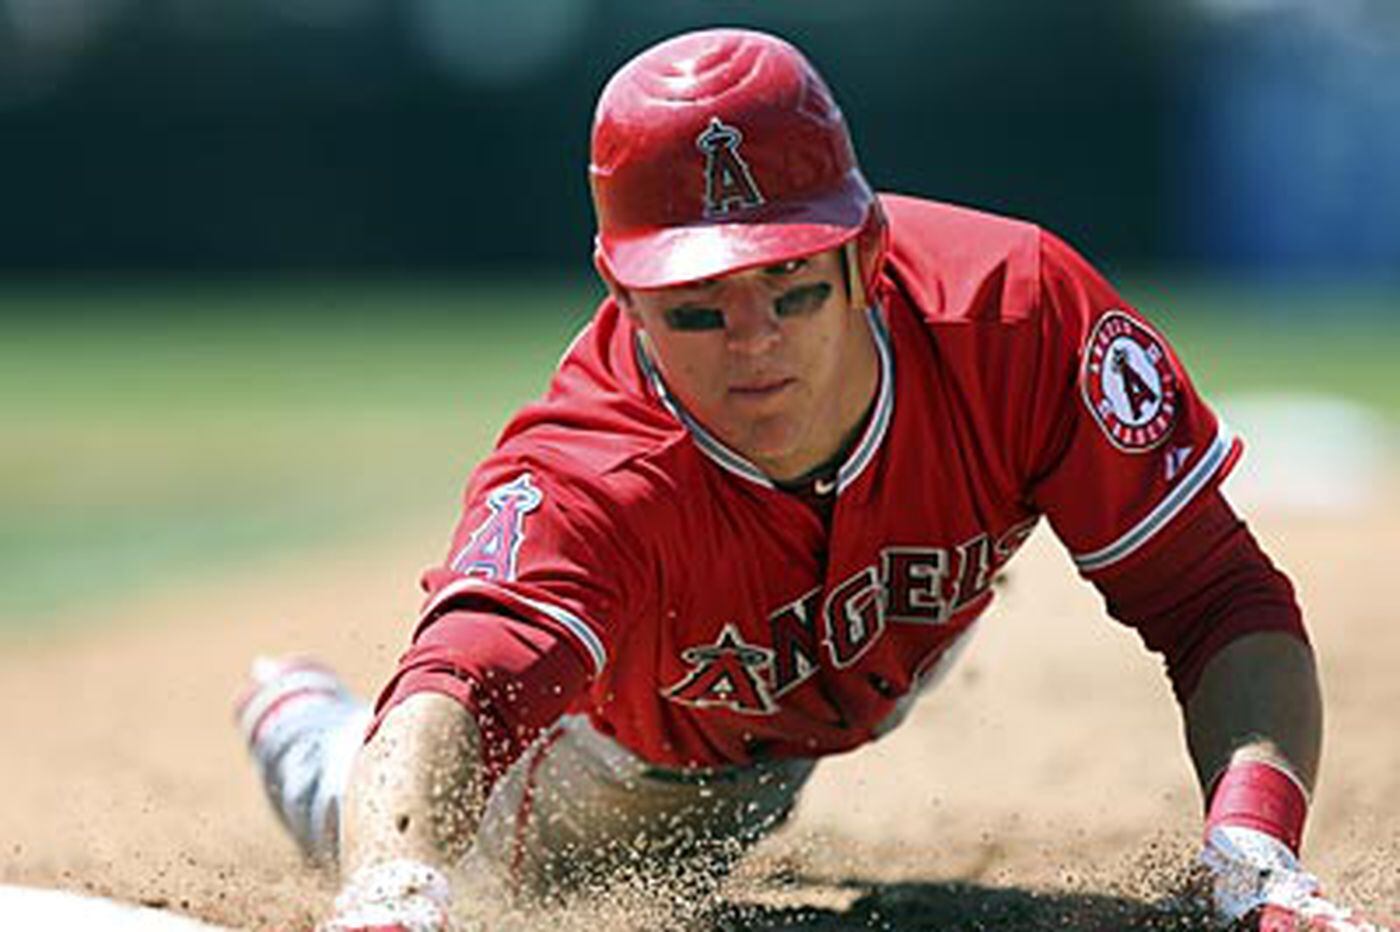 Millville's Mike Trout wins AL rookie of the year